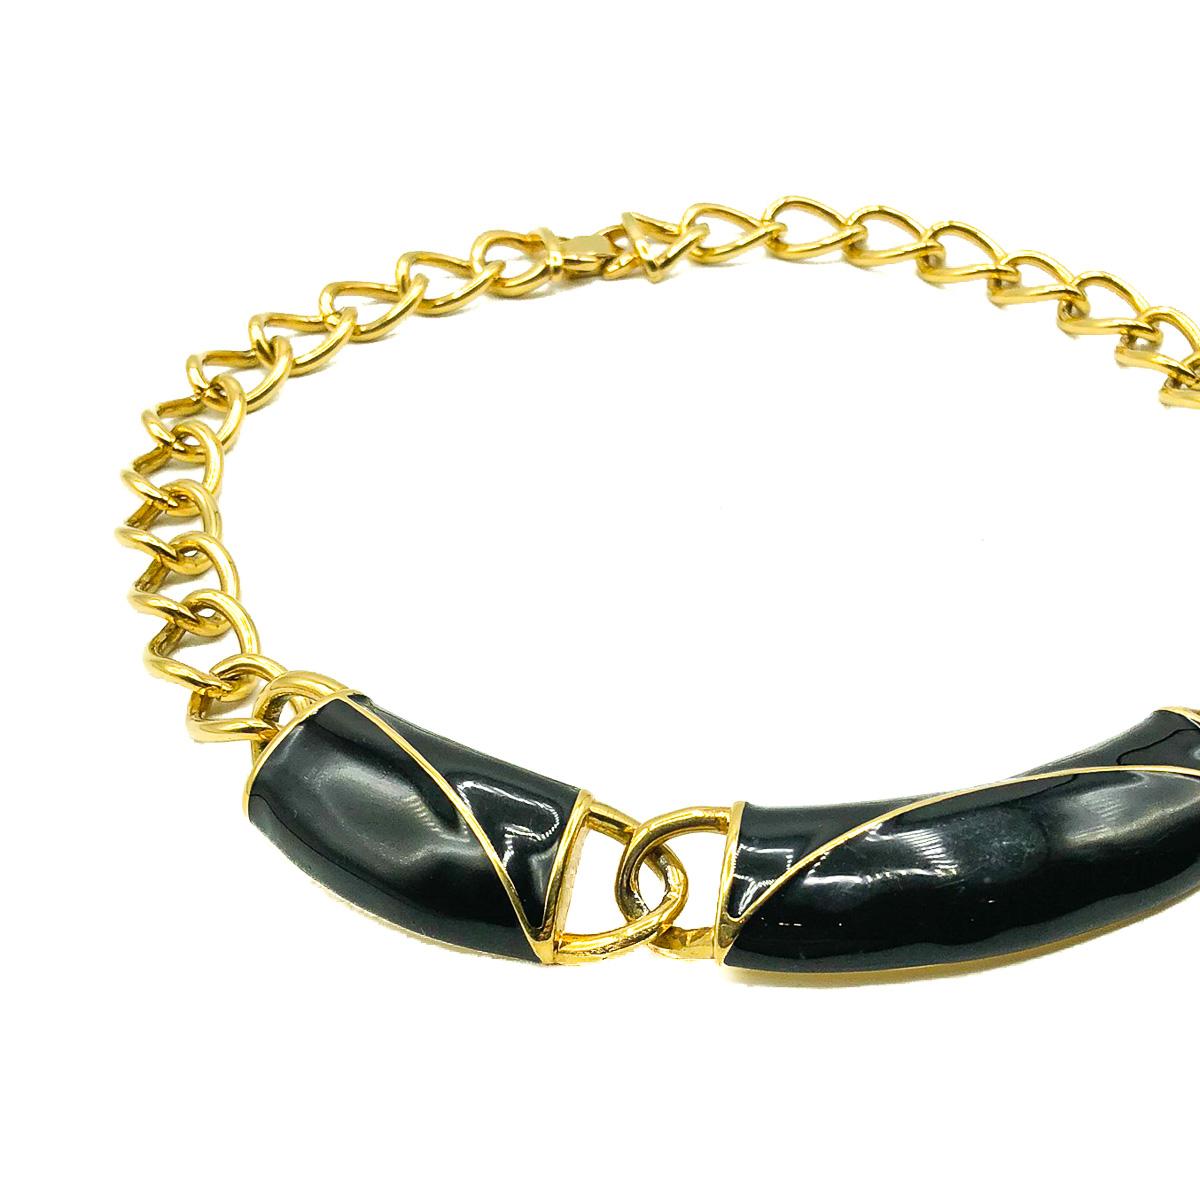 A Vintage Monet Enamel Collar. Crafted in gold plated metal and lustrous black enamel. Featuring a fabulous large link chunky chain giving way to a trio of impressive modernist black enamelled sections. In very good vintage condition, signed and